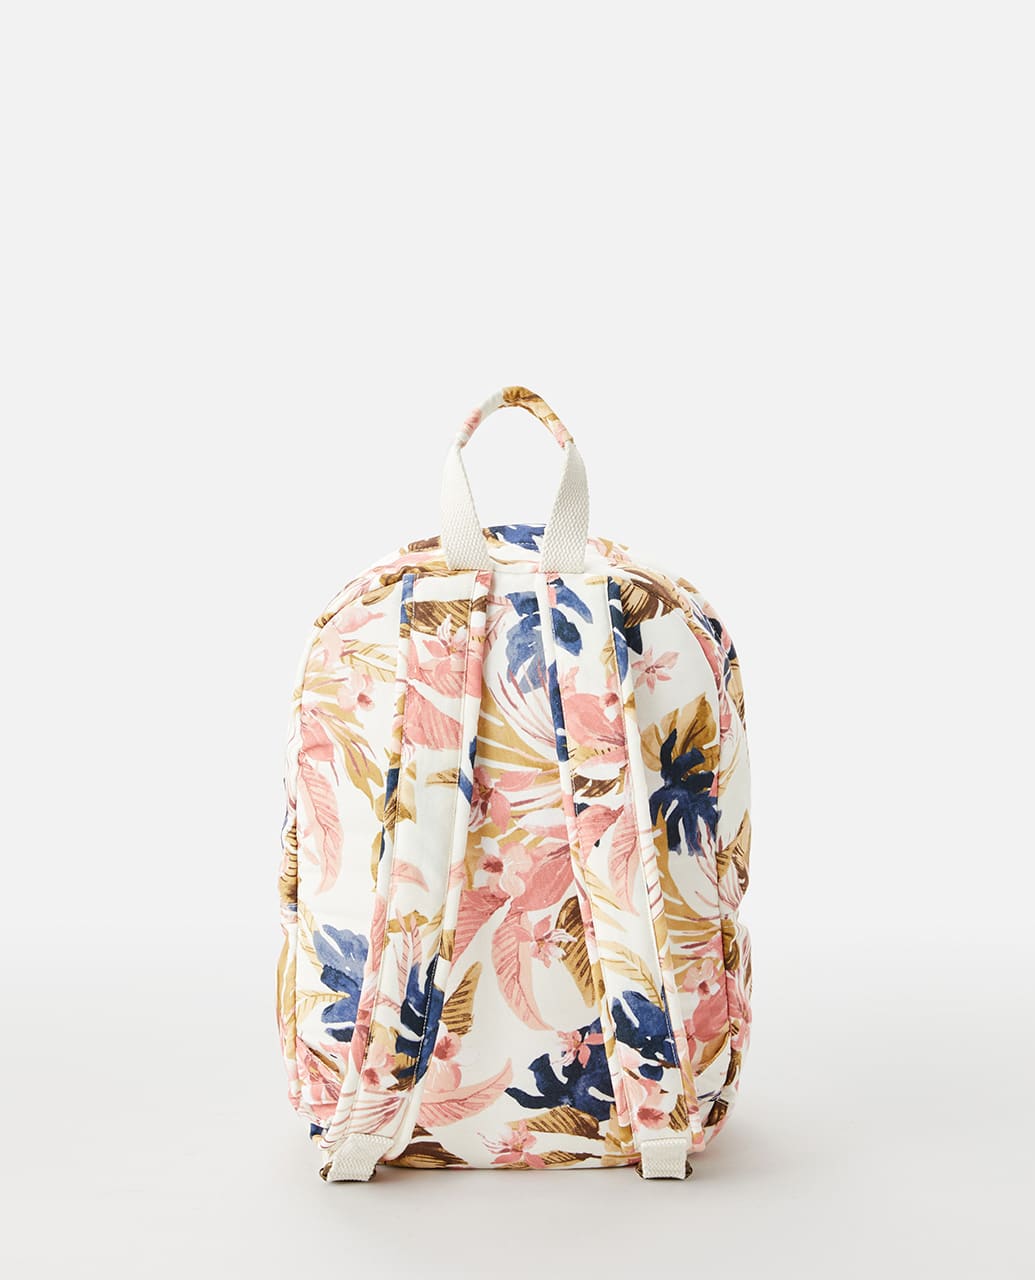 Canvas 18L Mixed Backpack